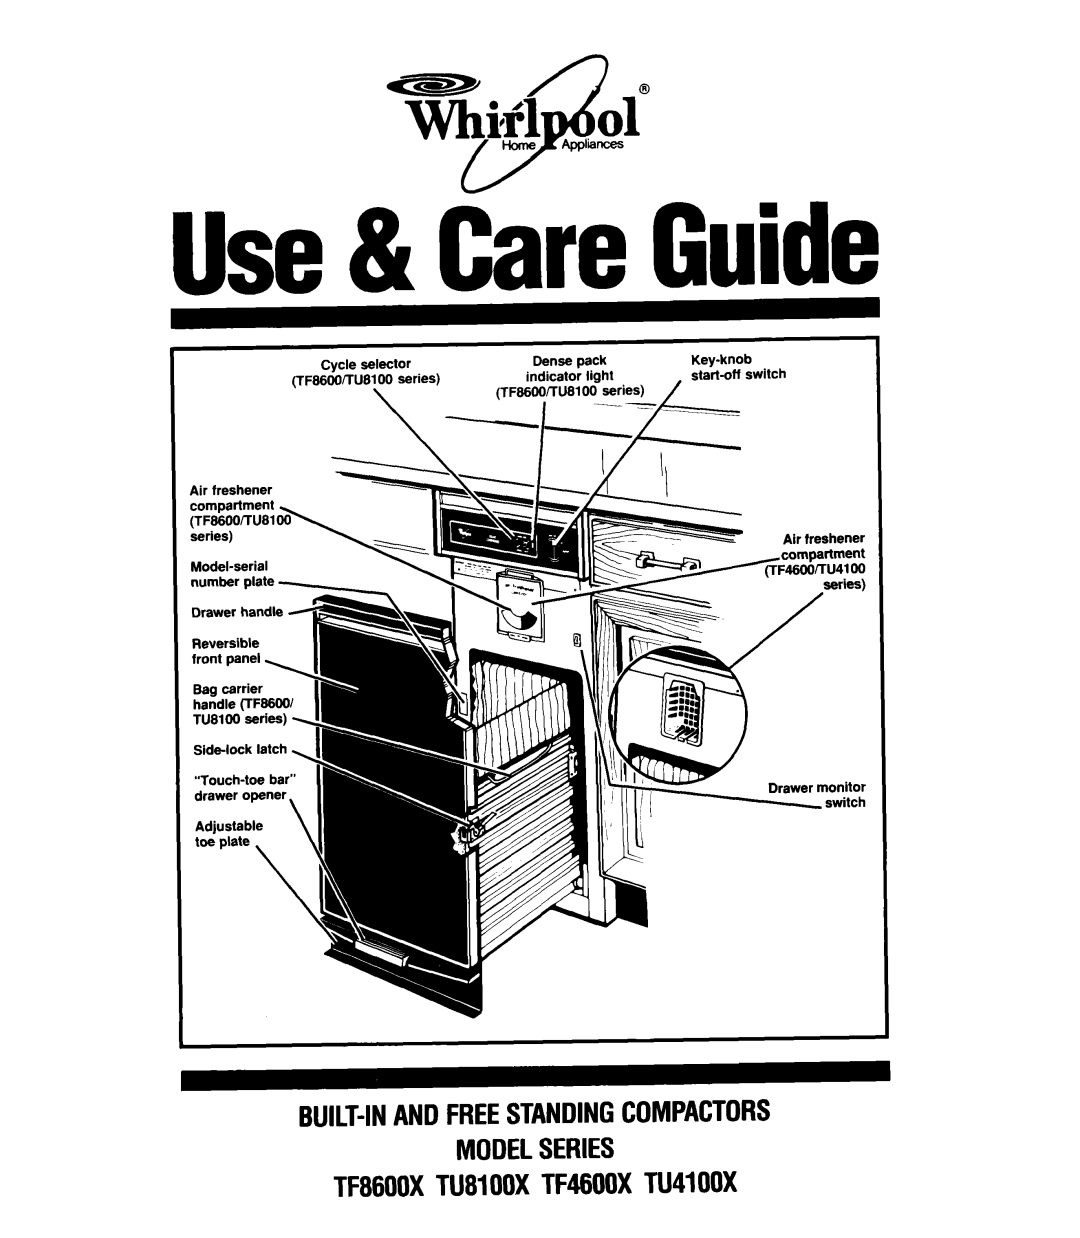 Whirlpool manual Built-Inandfreestandingcompactors Modelseries, TFSGOOXTUSIOOXTF4600XTU4100X, Use& dre Guide, A--I 